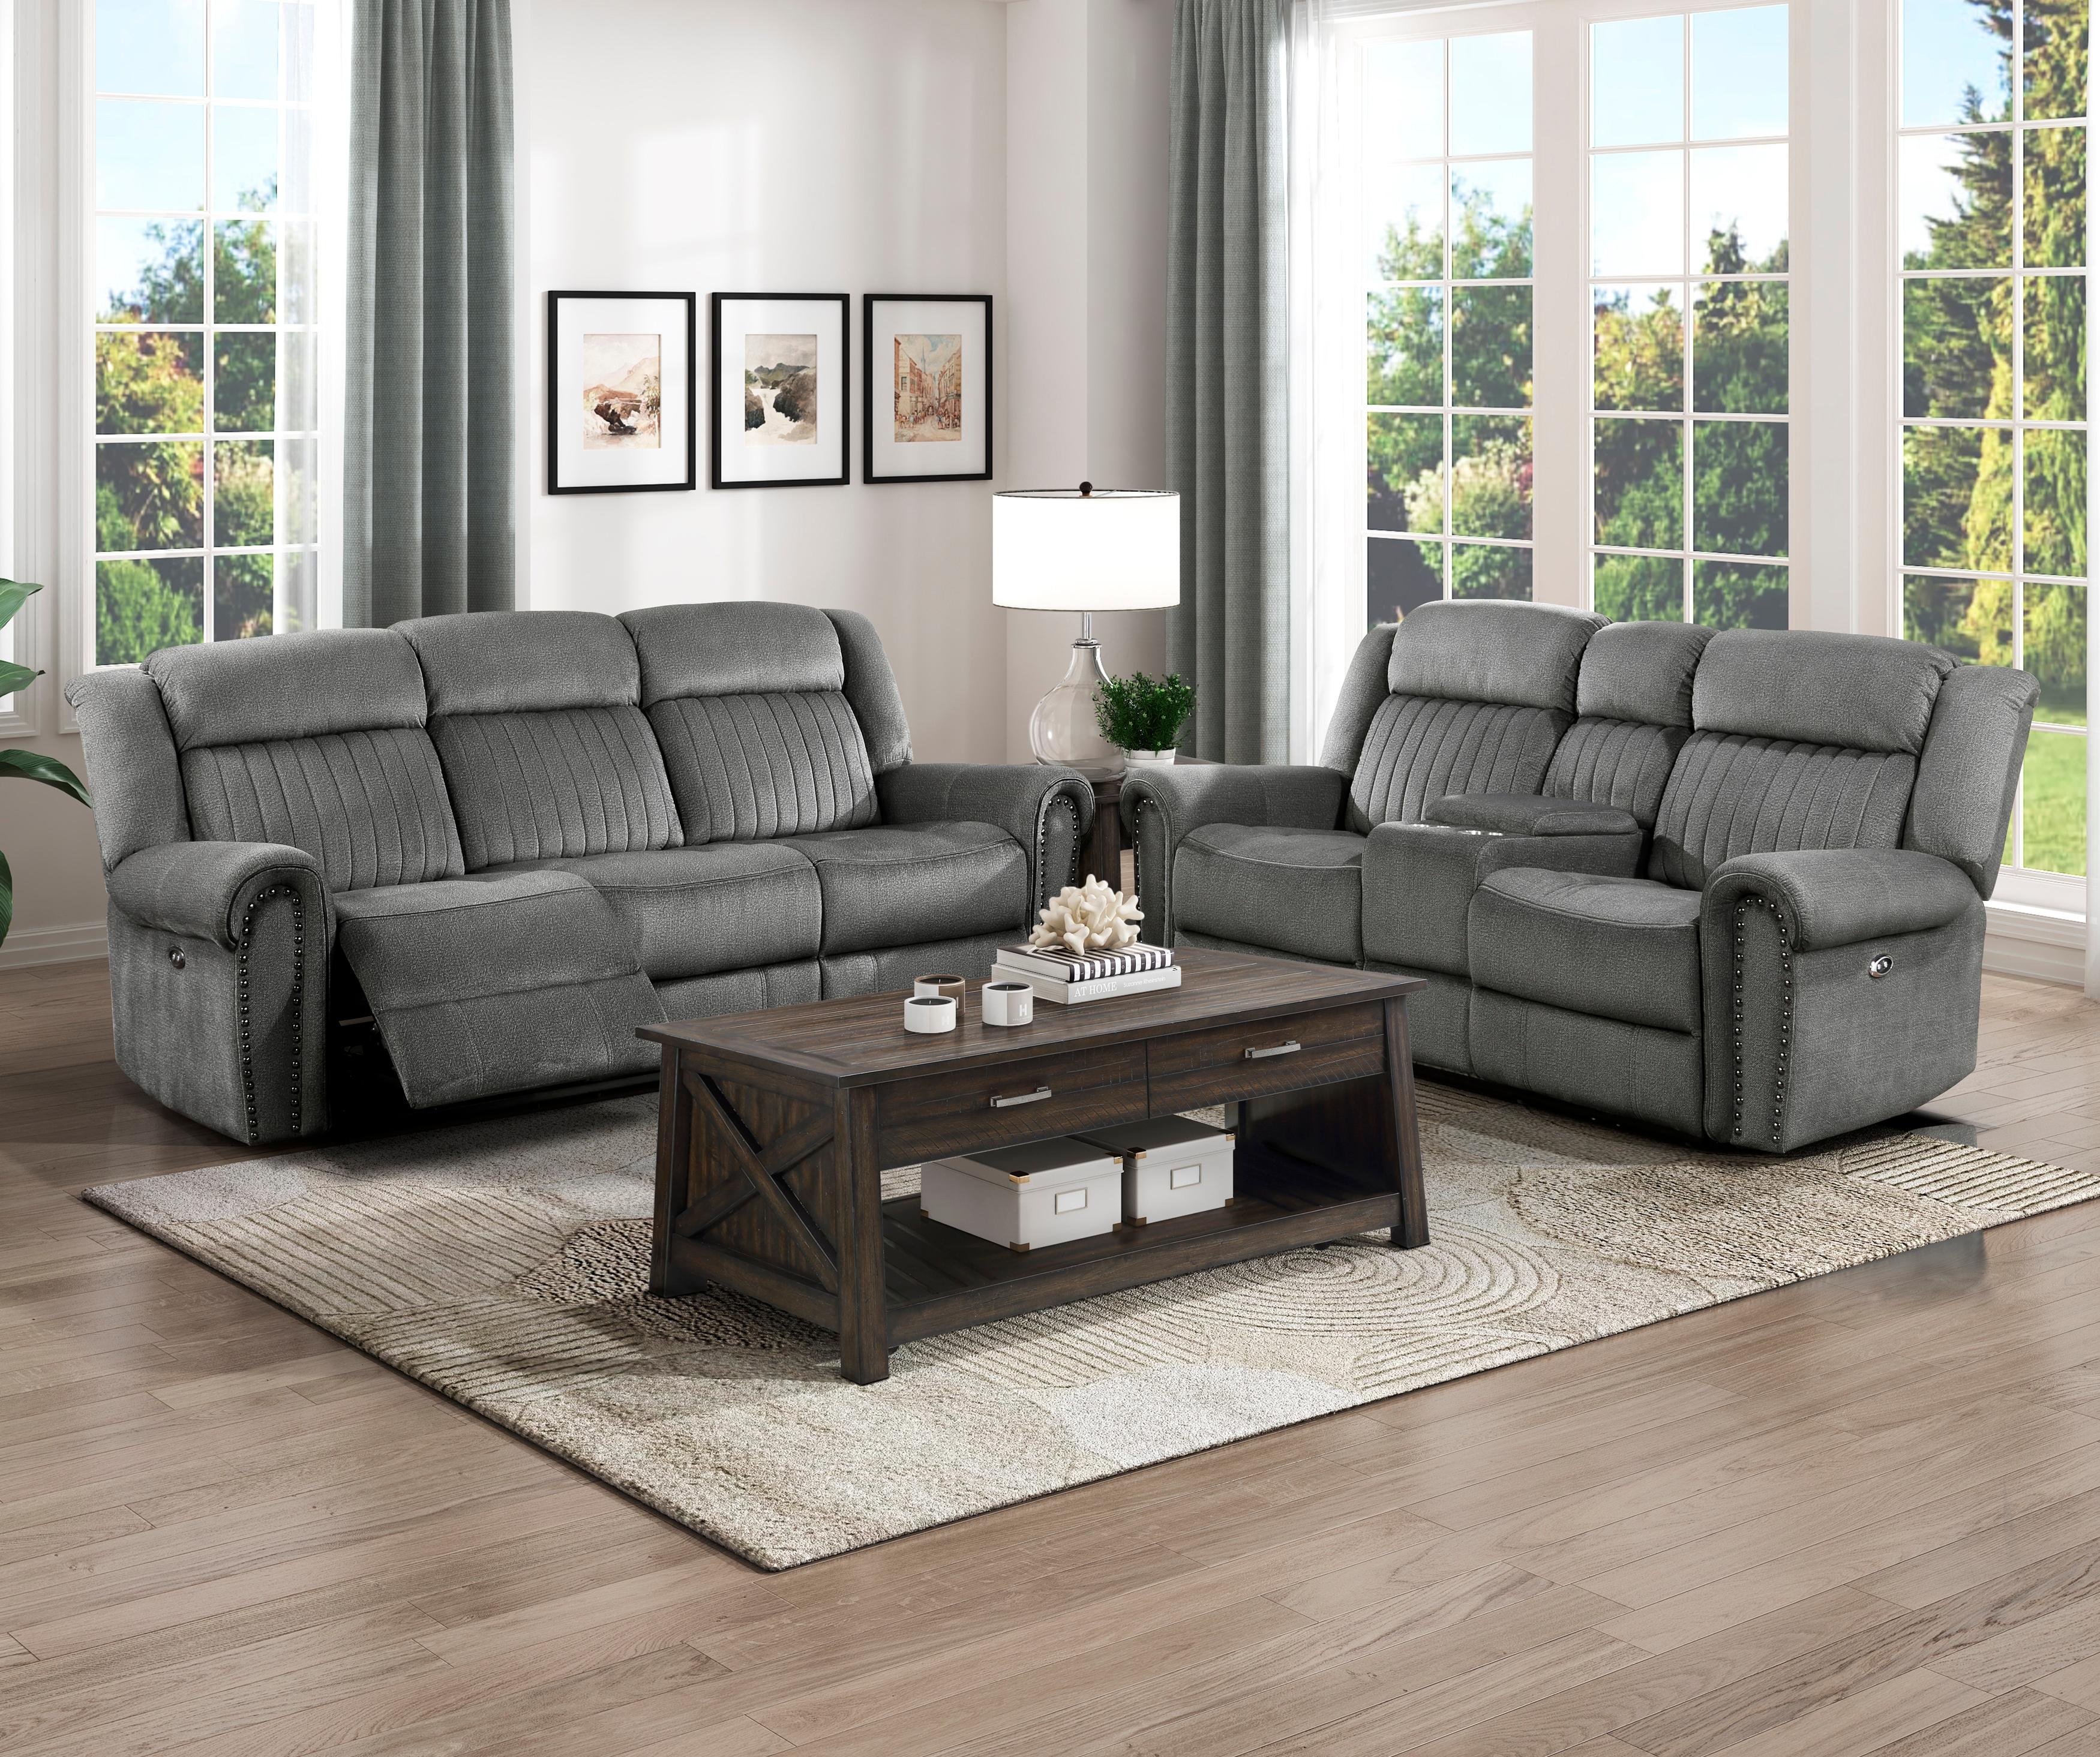 Transitional Reclining Set 9204CC-2PC Brennen 9204CC-2PC in Charcoal Microfiber